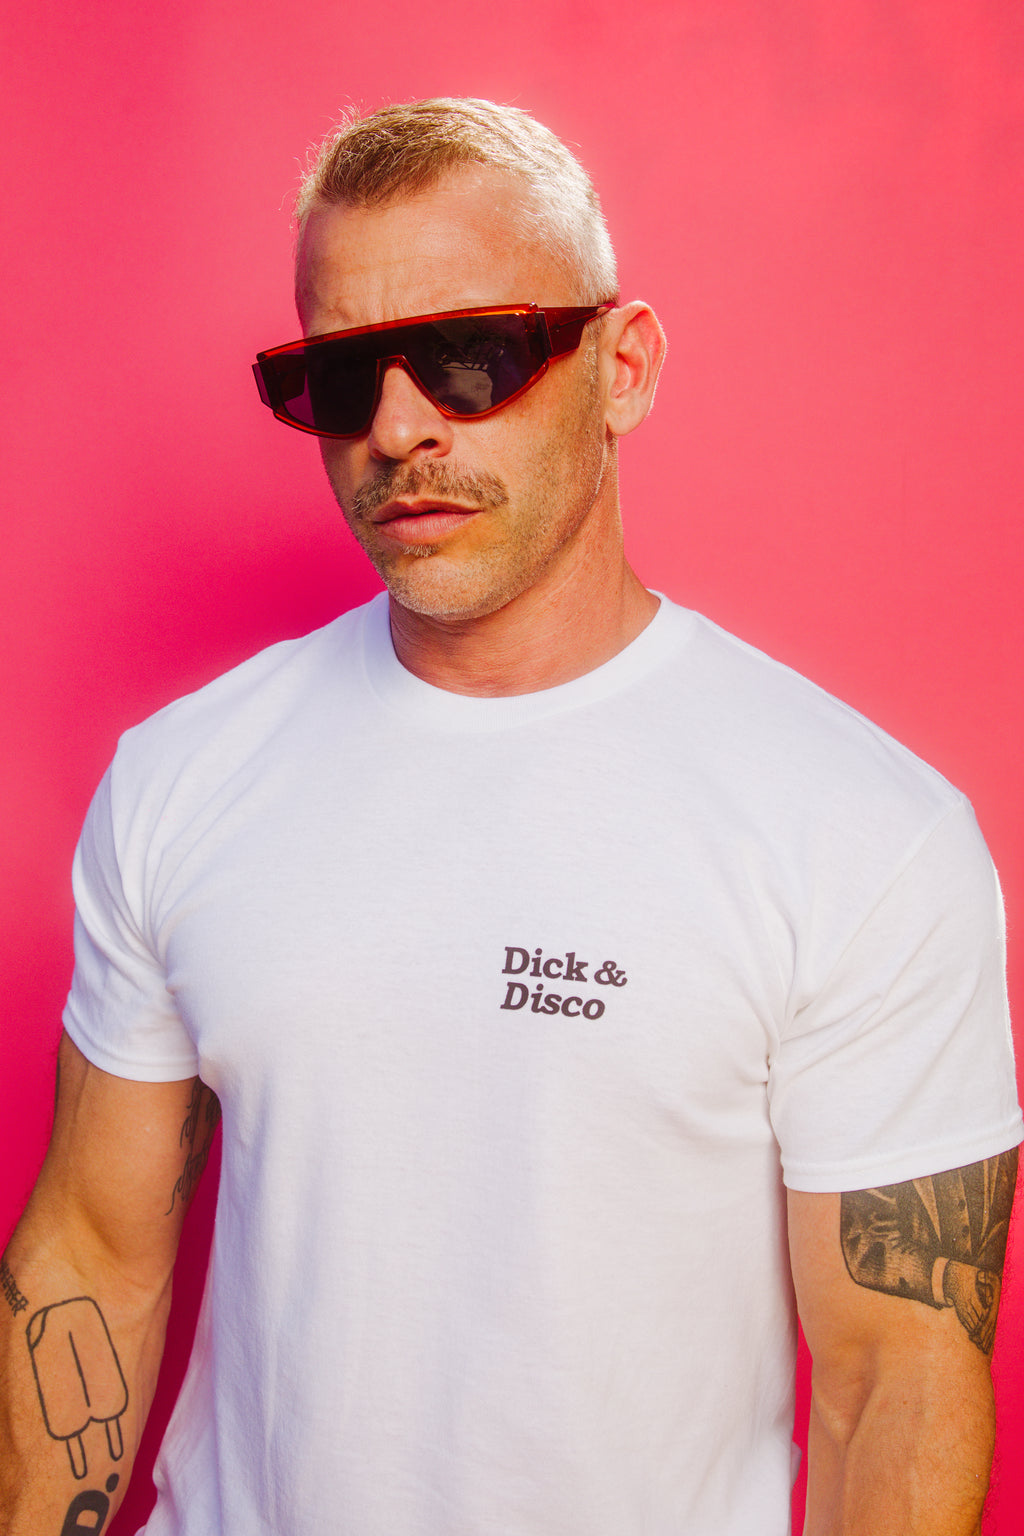 DICKS AND DISCO T-SHIRT BY TANNER SHEA